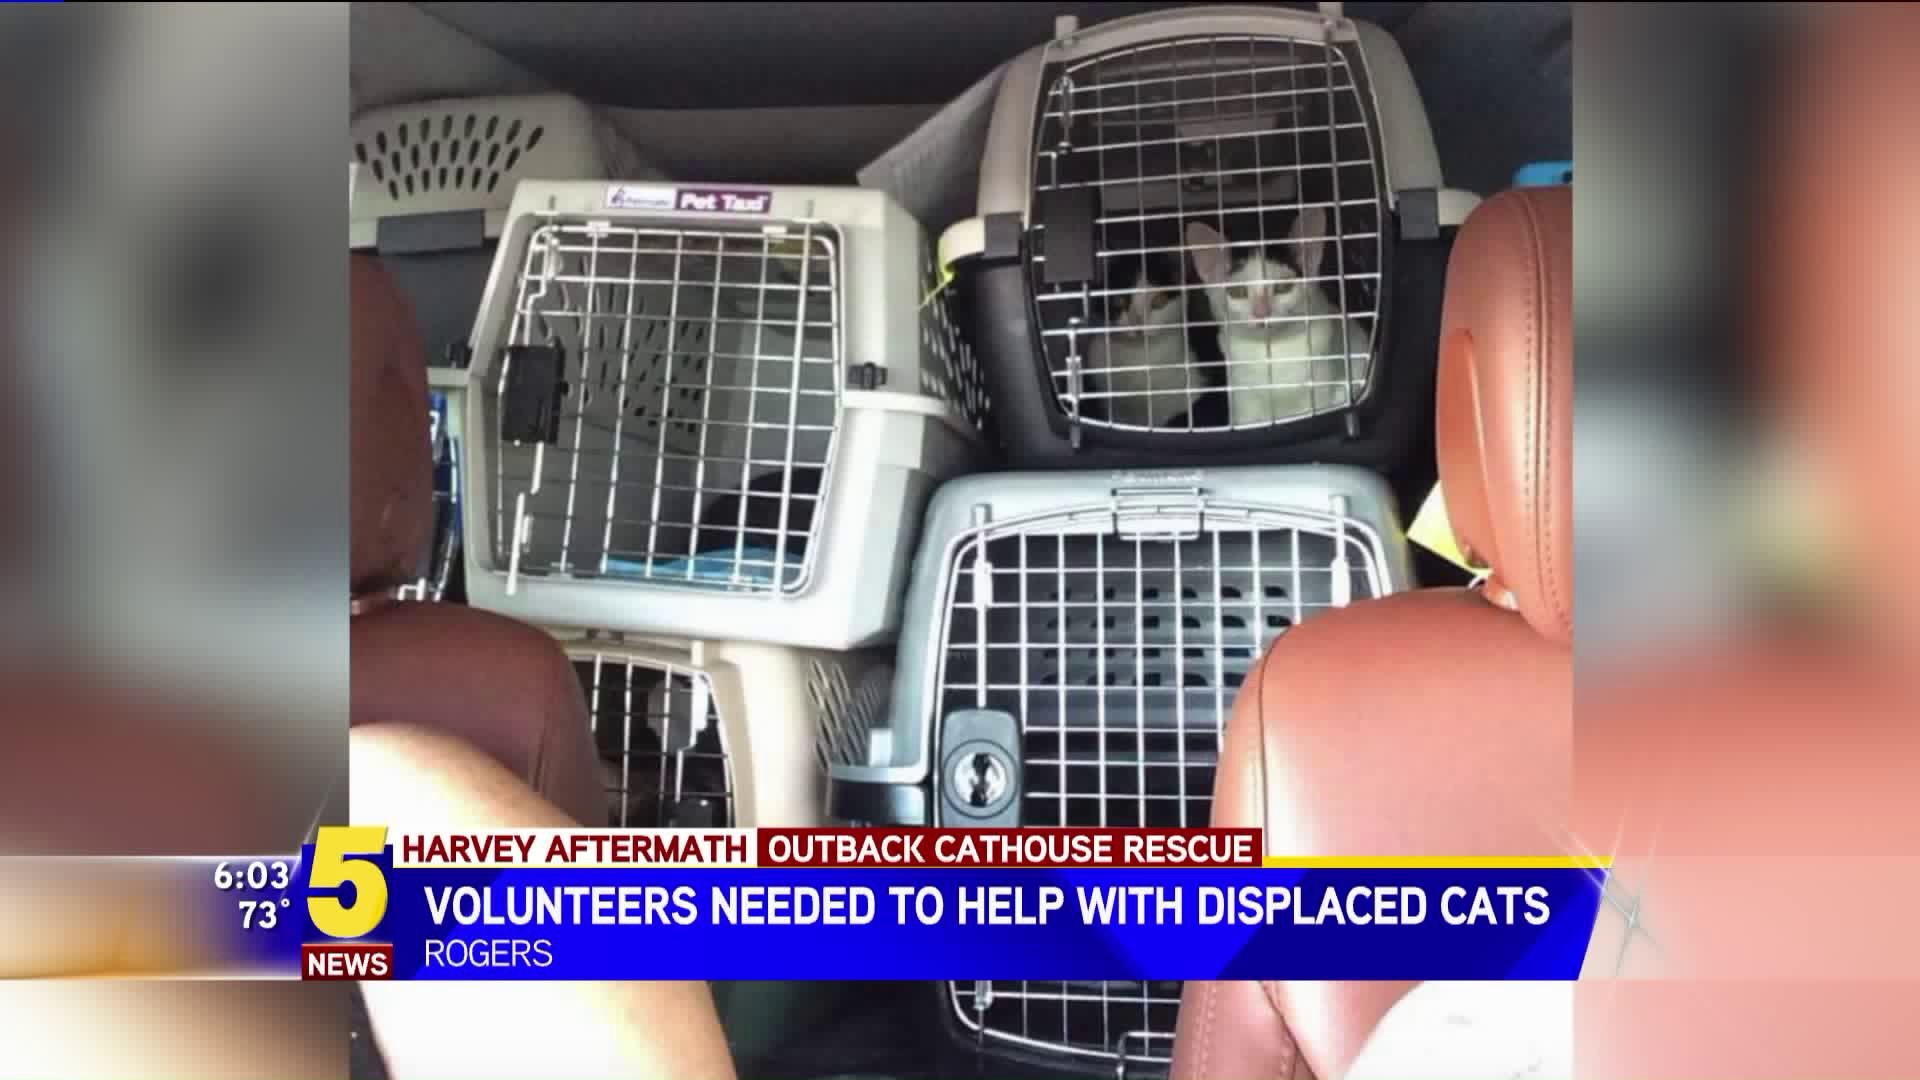 Volunteers Needed to Help With Displaced Cats